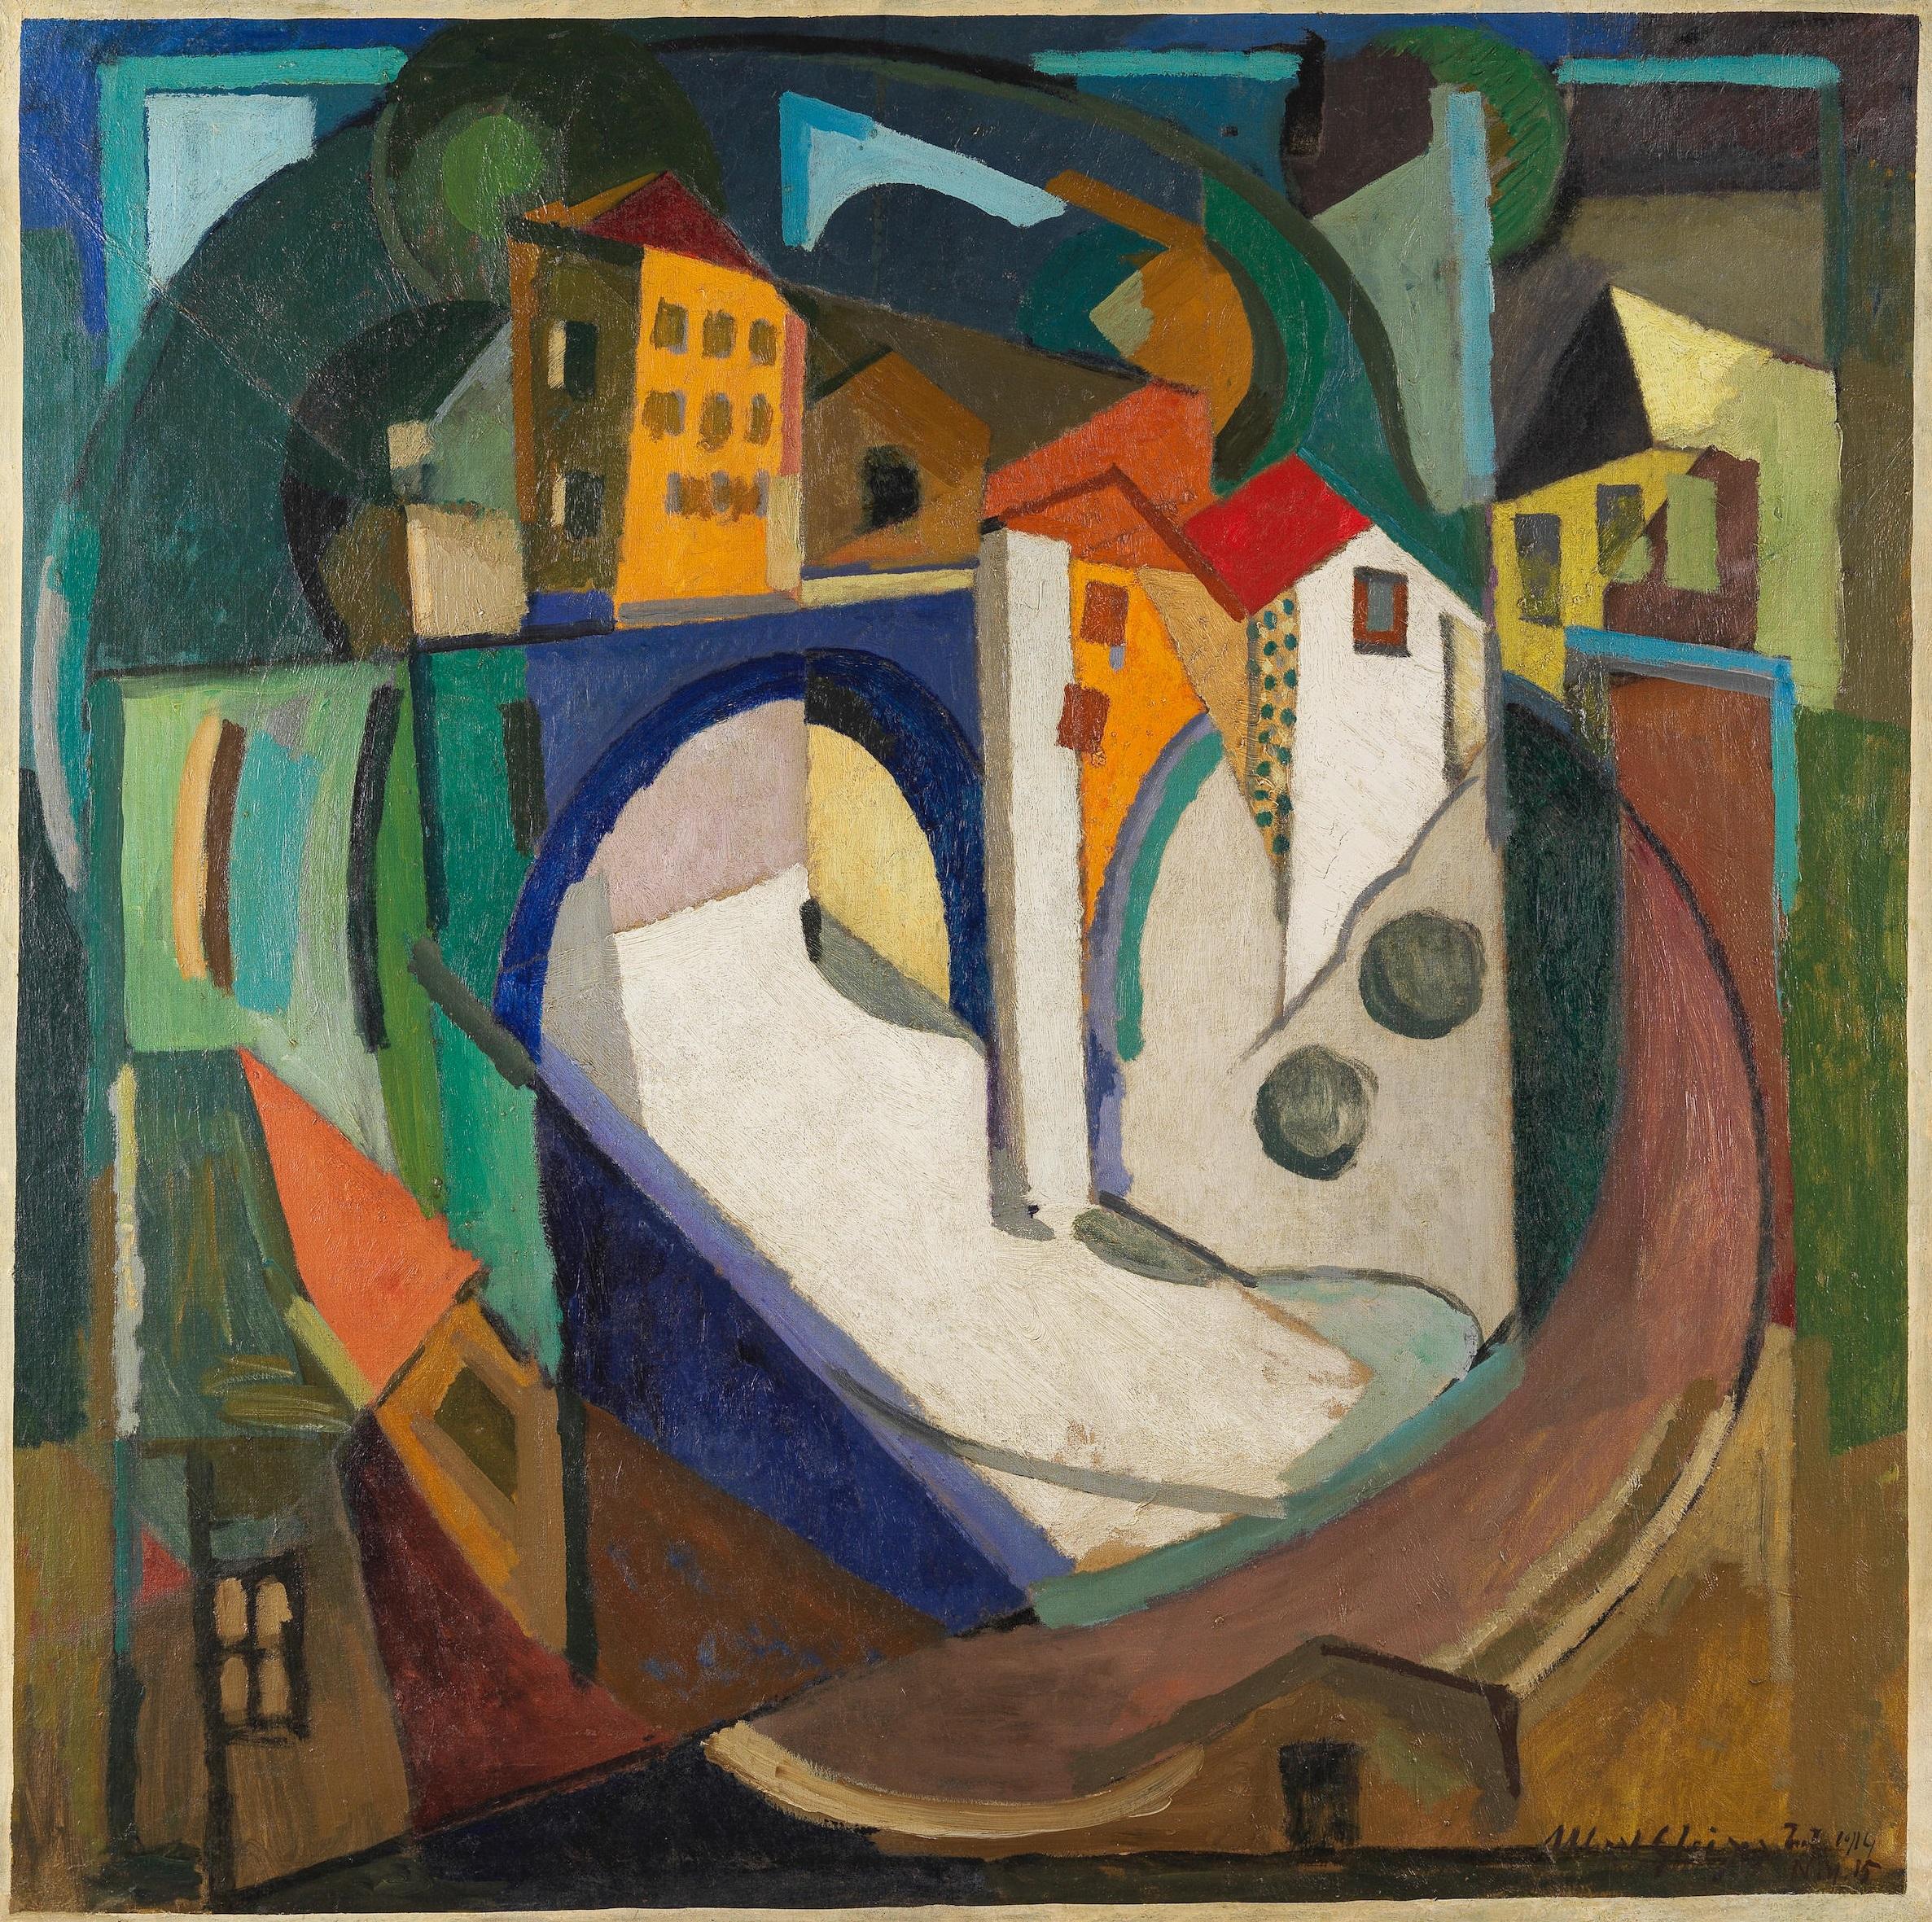 Paysage - Painting by Albert Gleizes